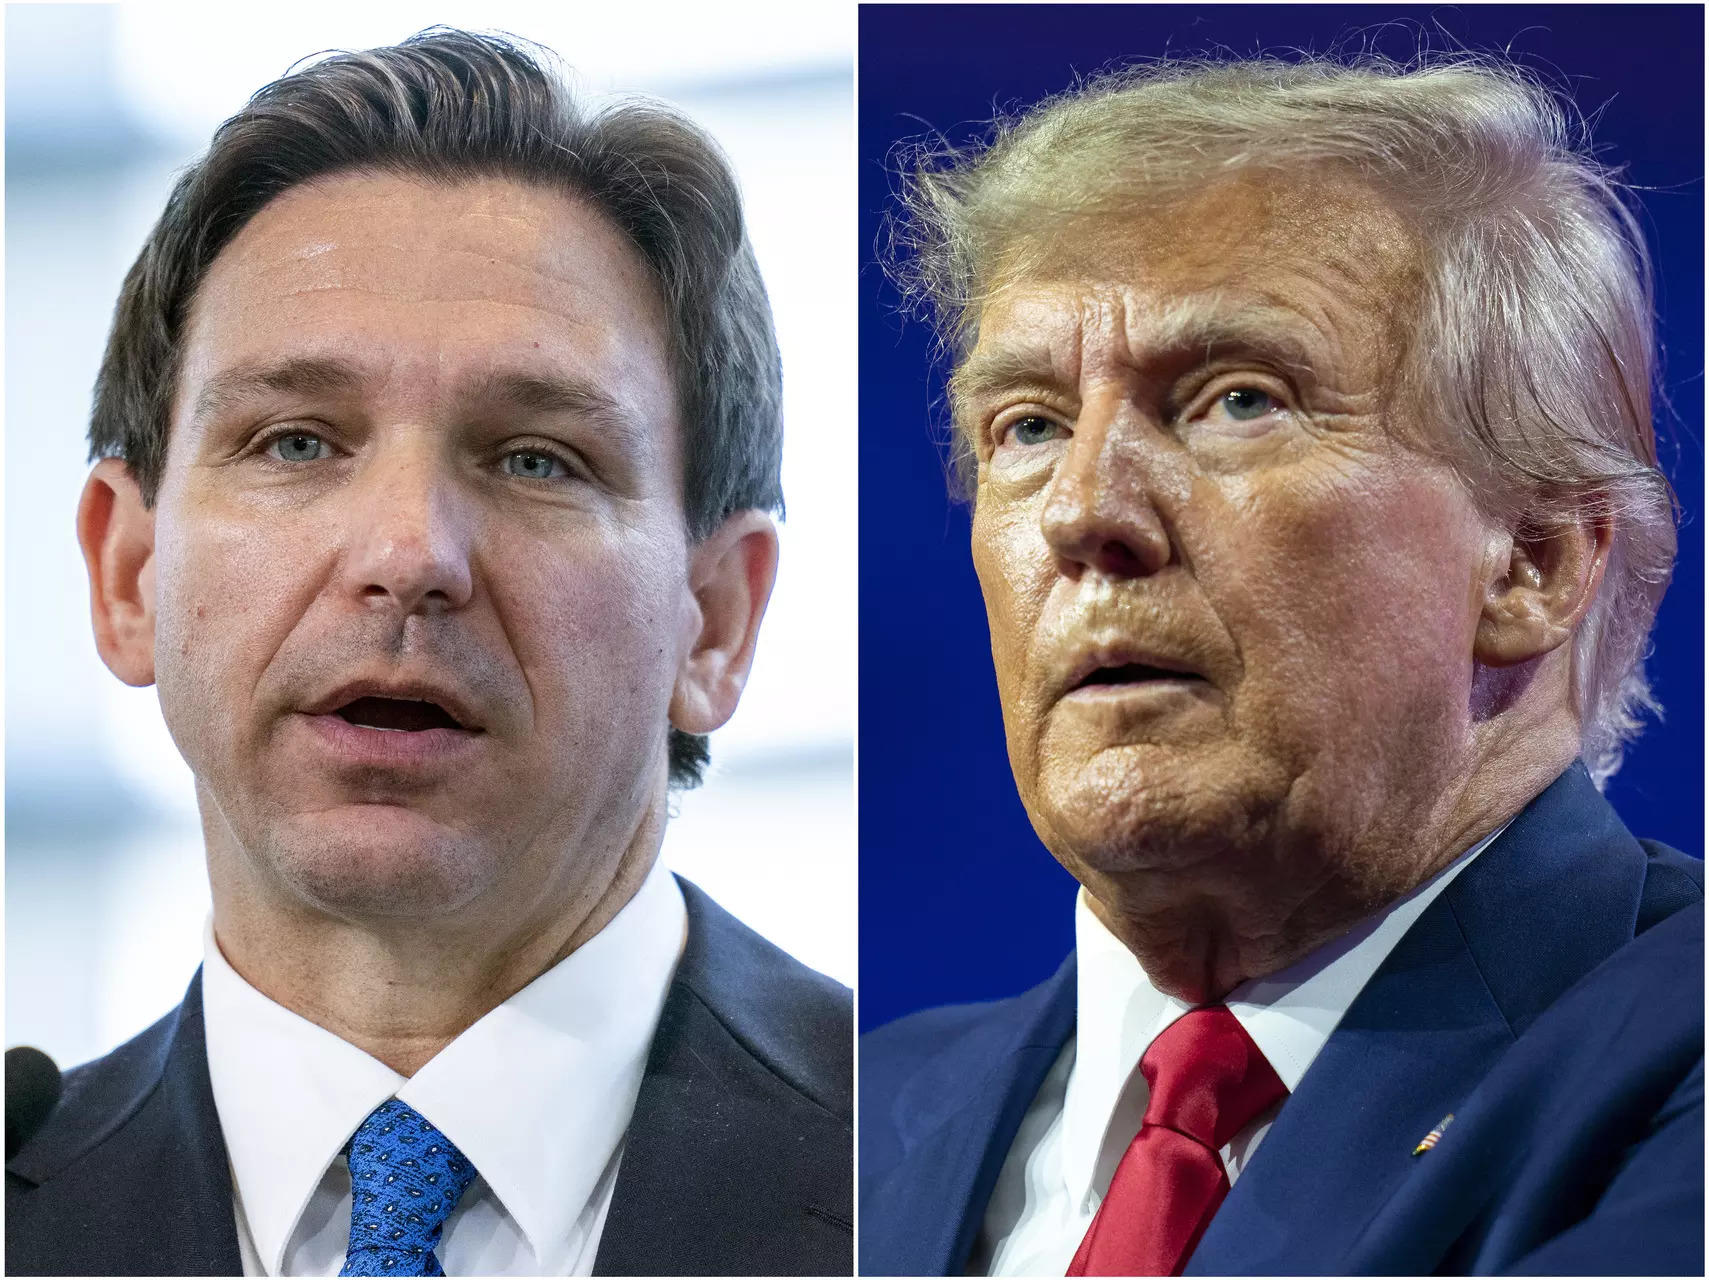 Trump and DeSantis to hold duelling campaign events in New Hampshire after squabbling over timing